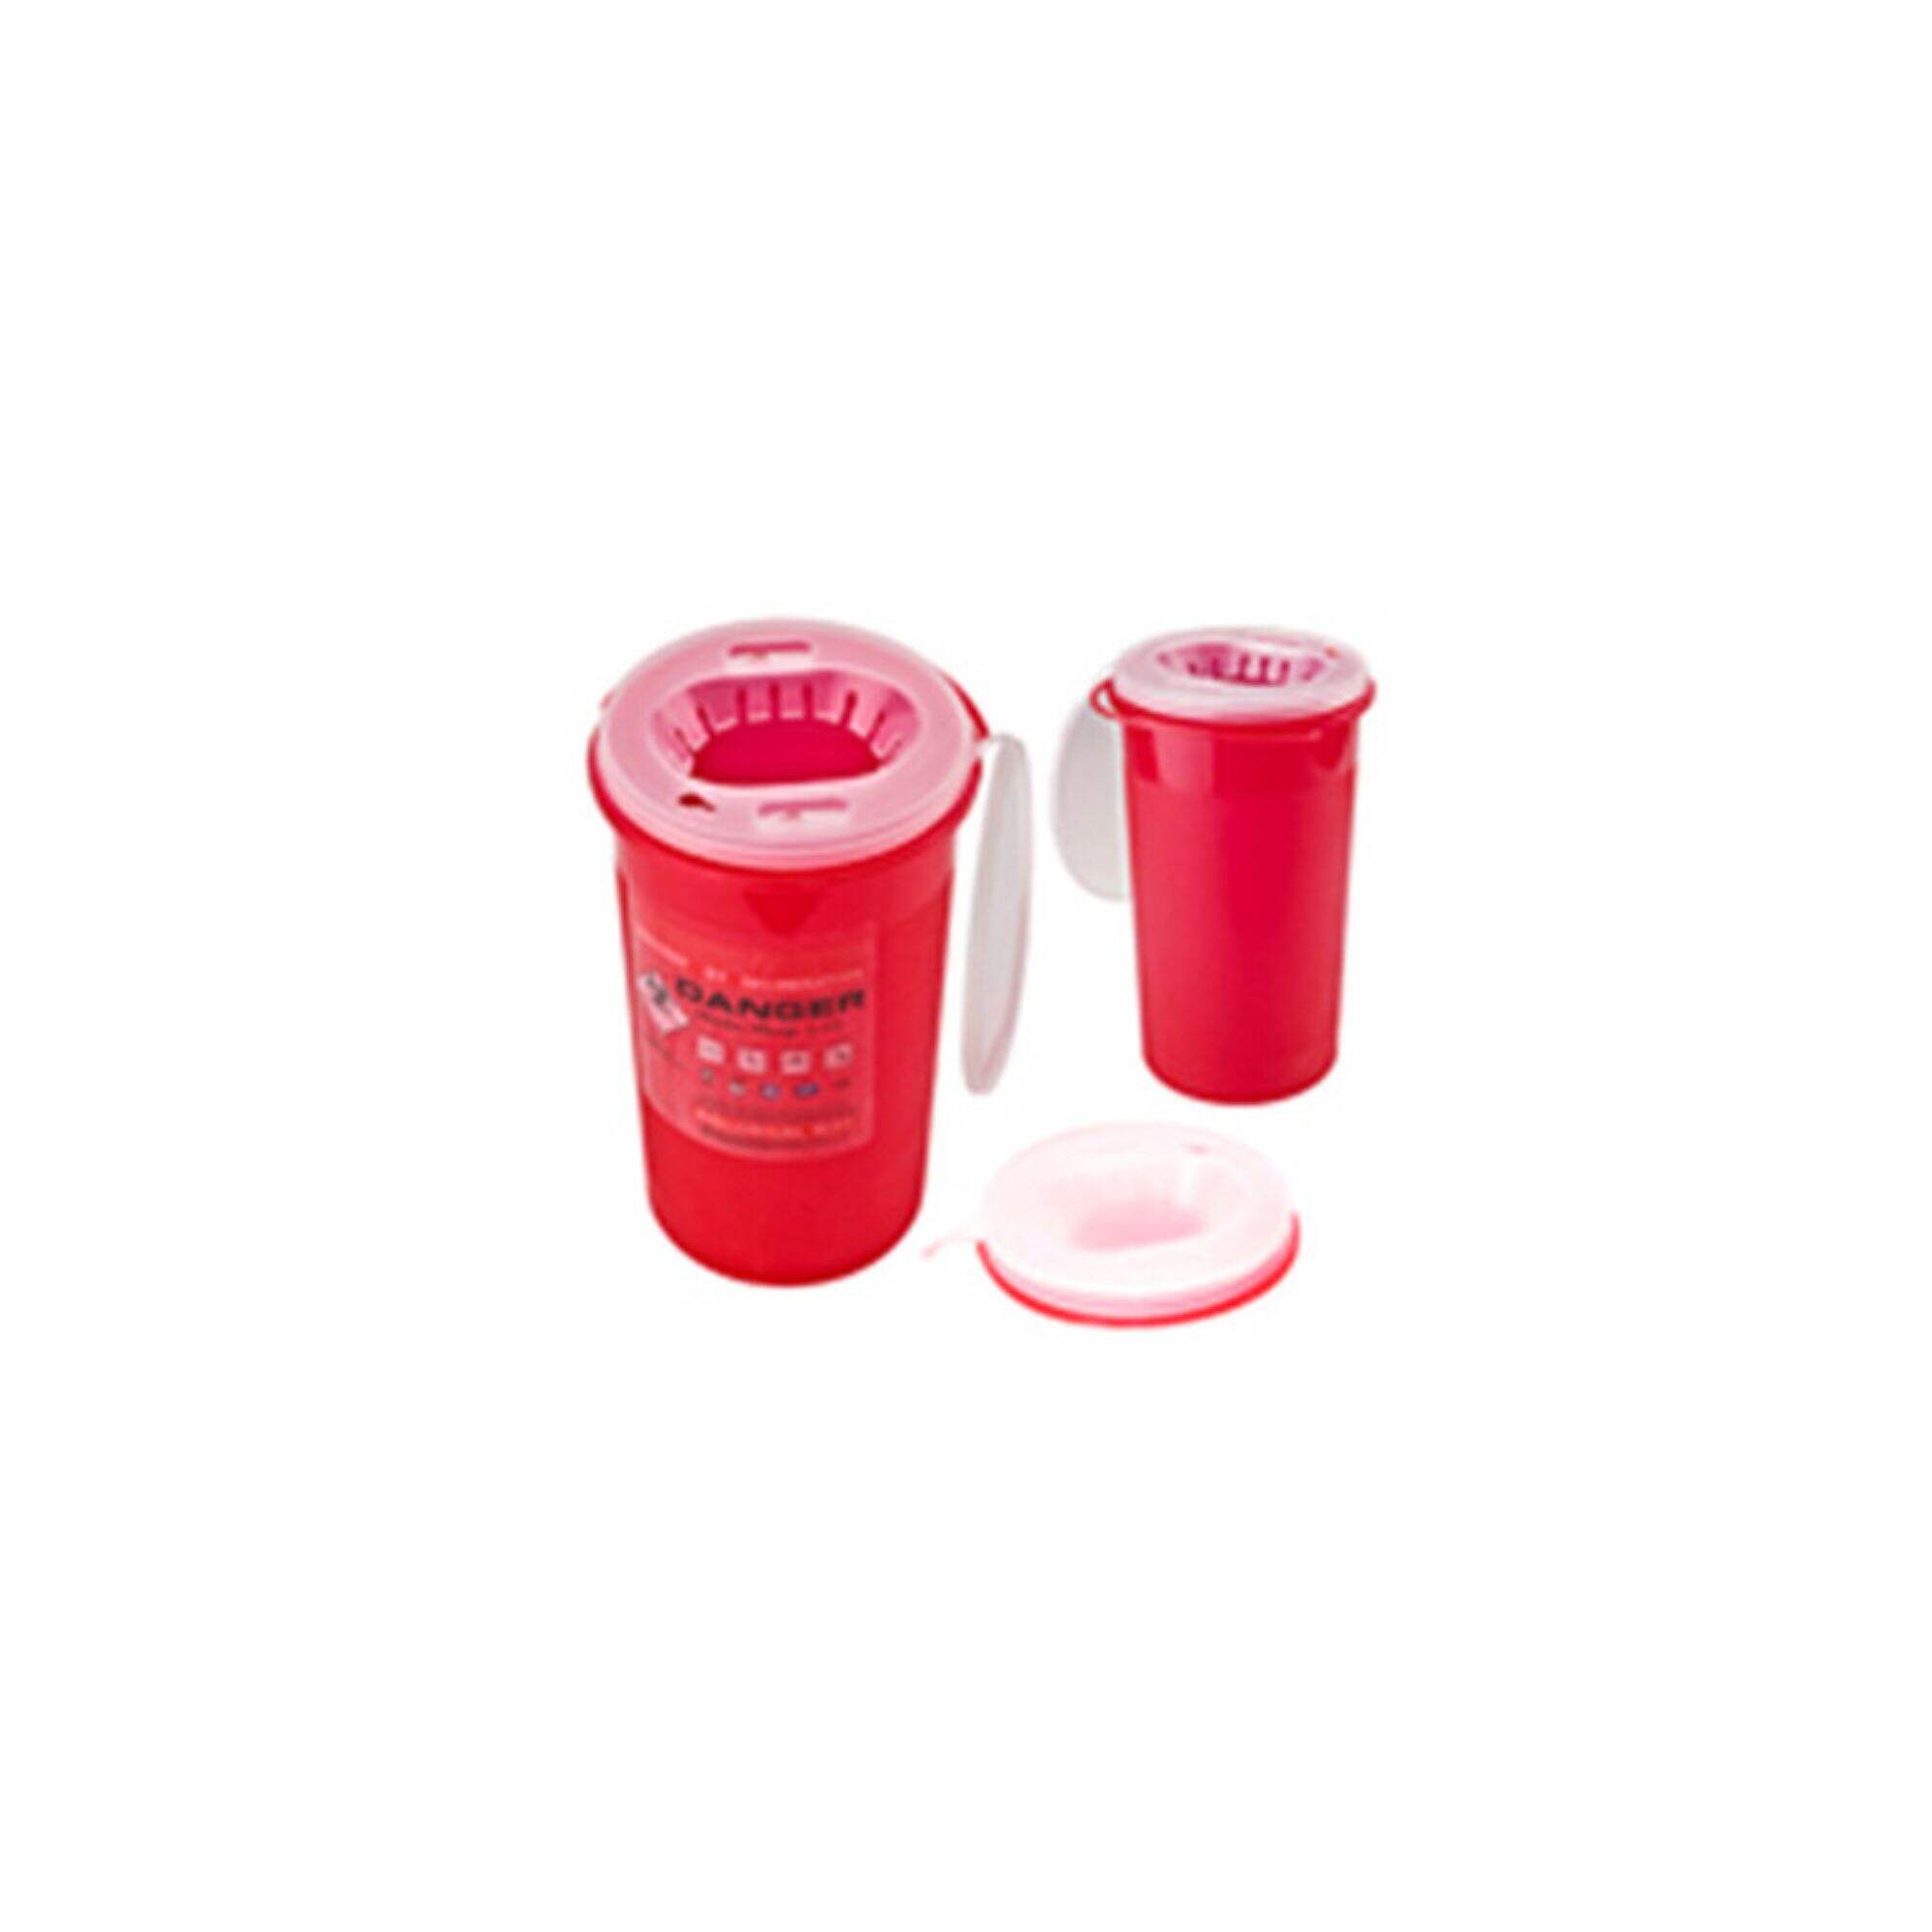 XHE-08 Medical Puncture Resistant Sharps Container  